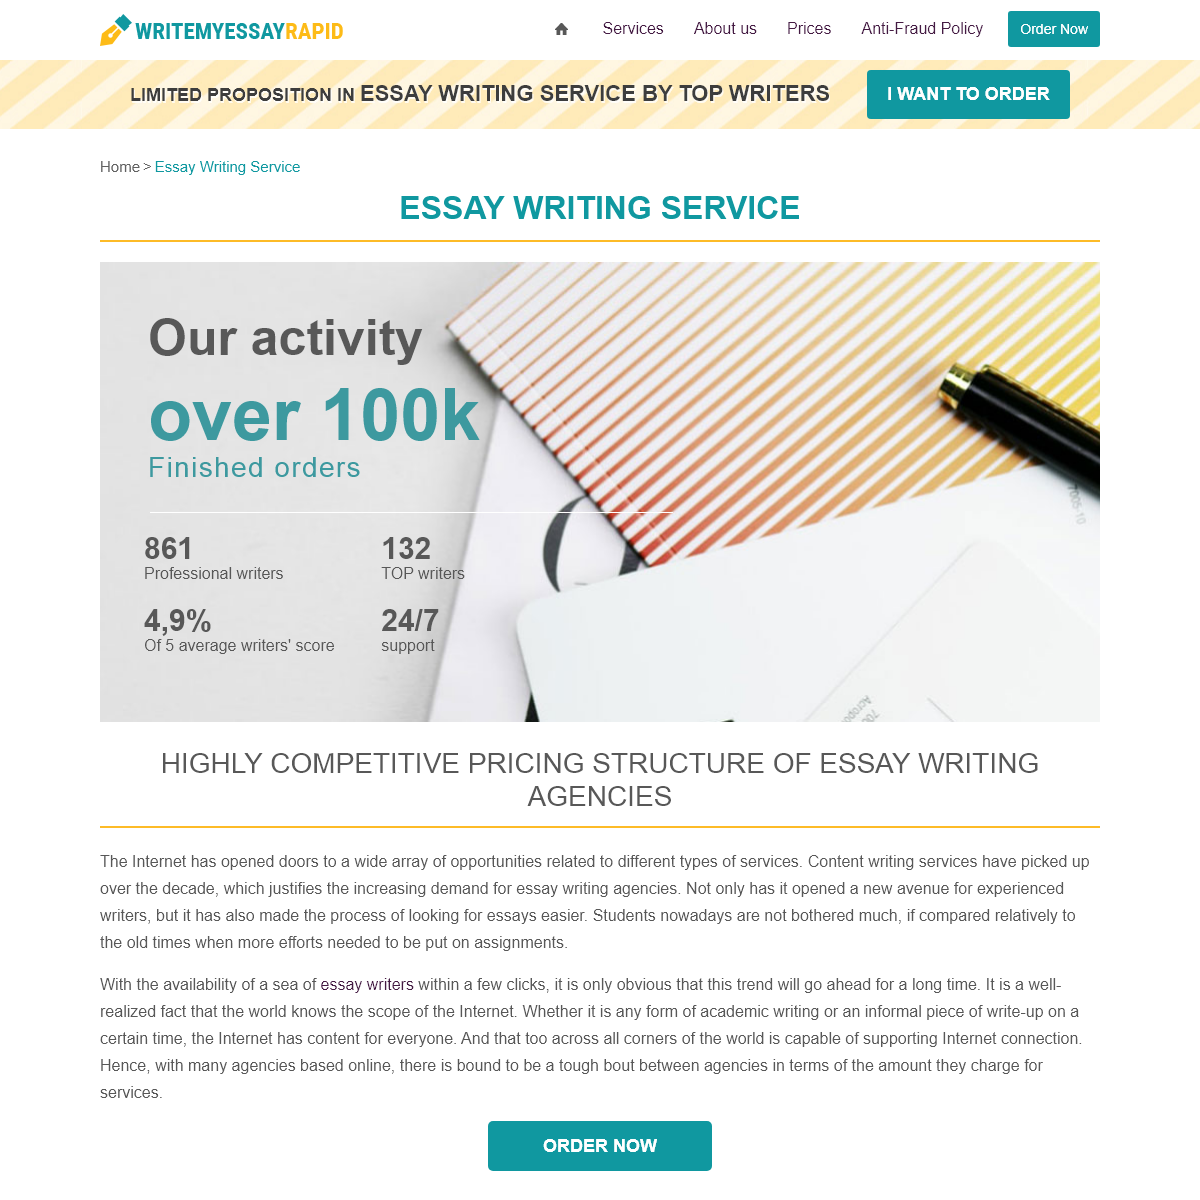 Quality essay writing at competitive market prices